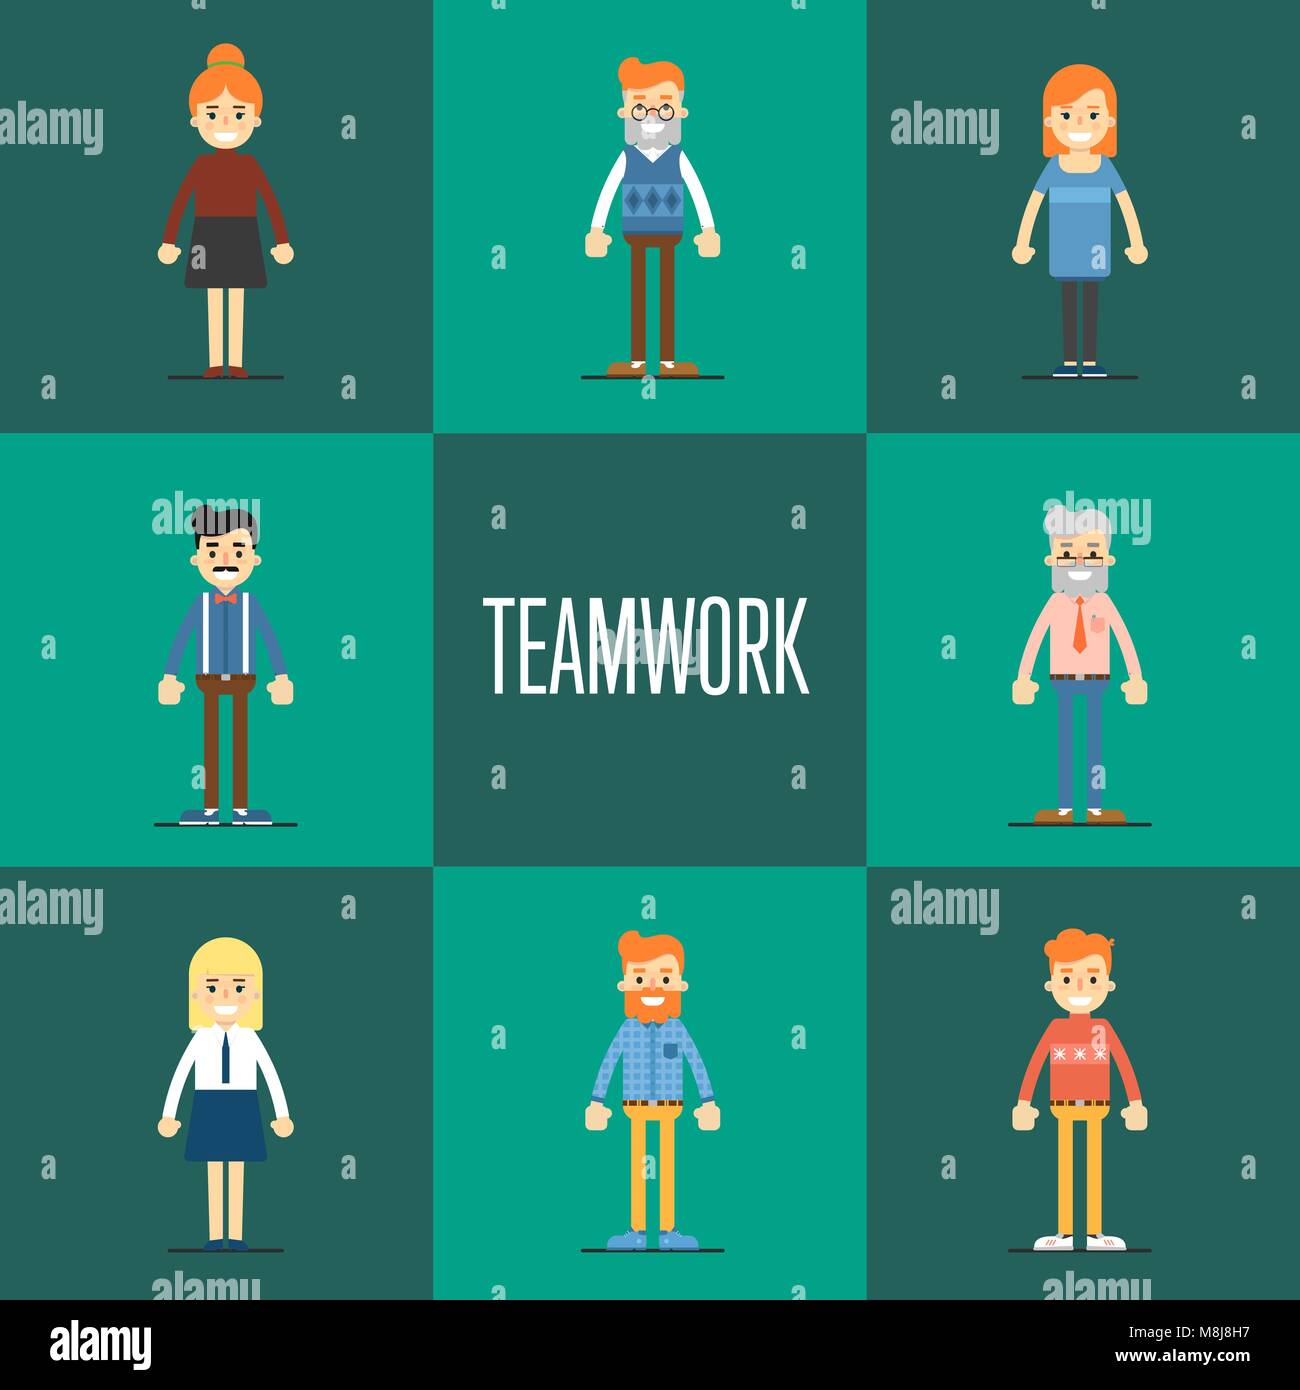 Teamwork concept with people cartoon characters Stock Vector Art